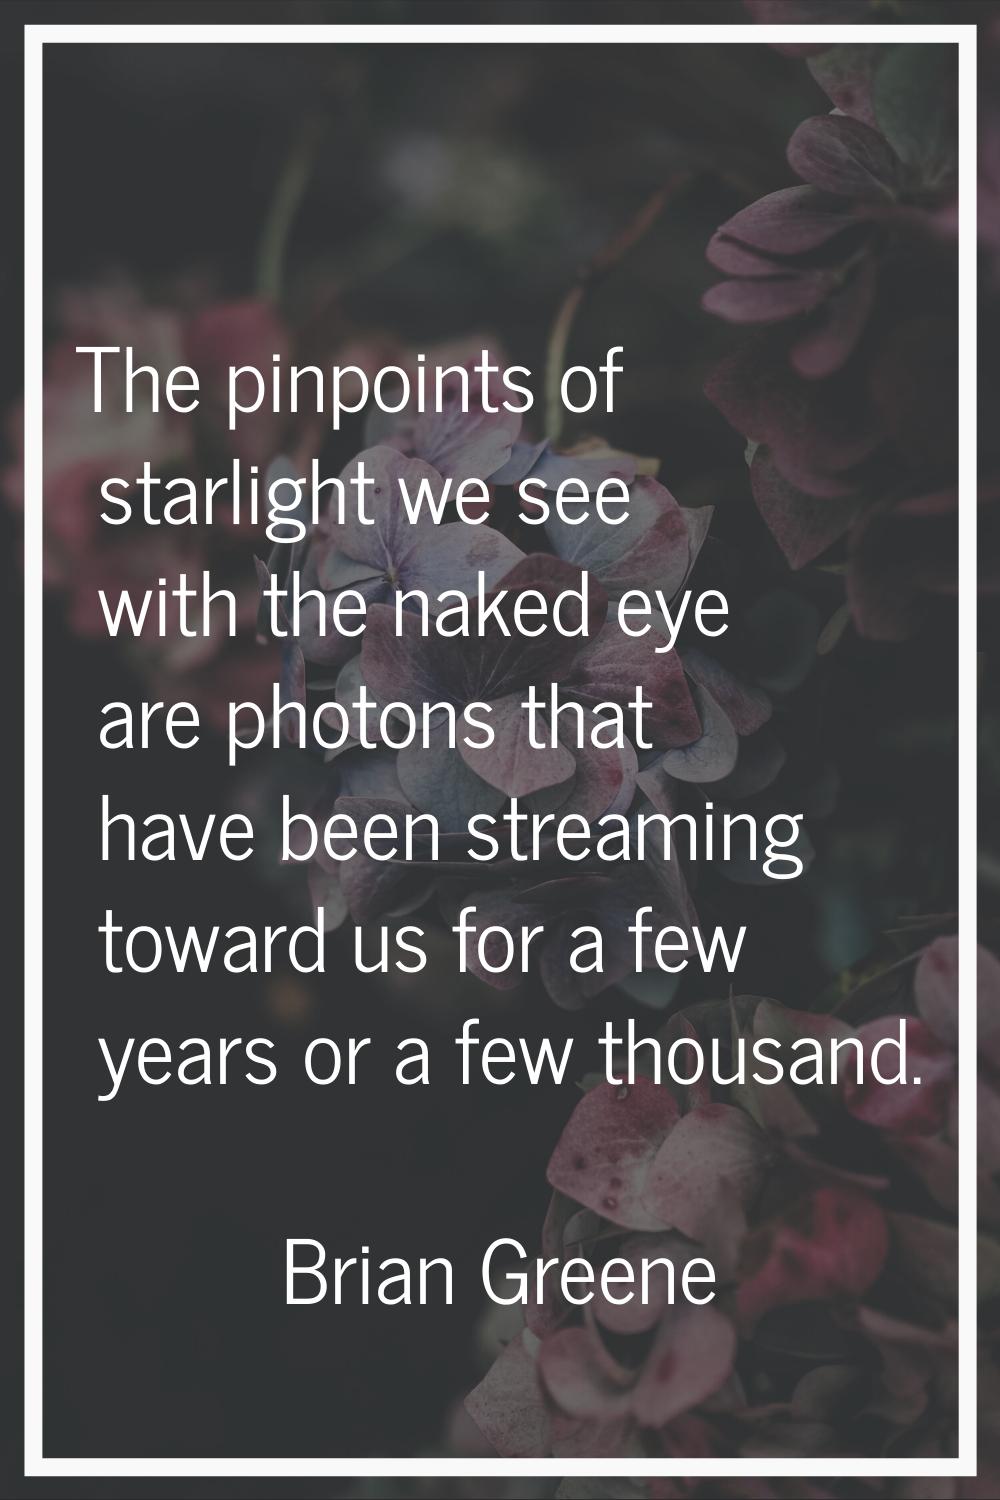 The pinpoints of starlight we see with the naked eye are photons that have been streaming toward us